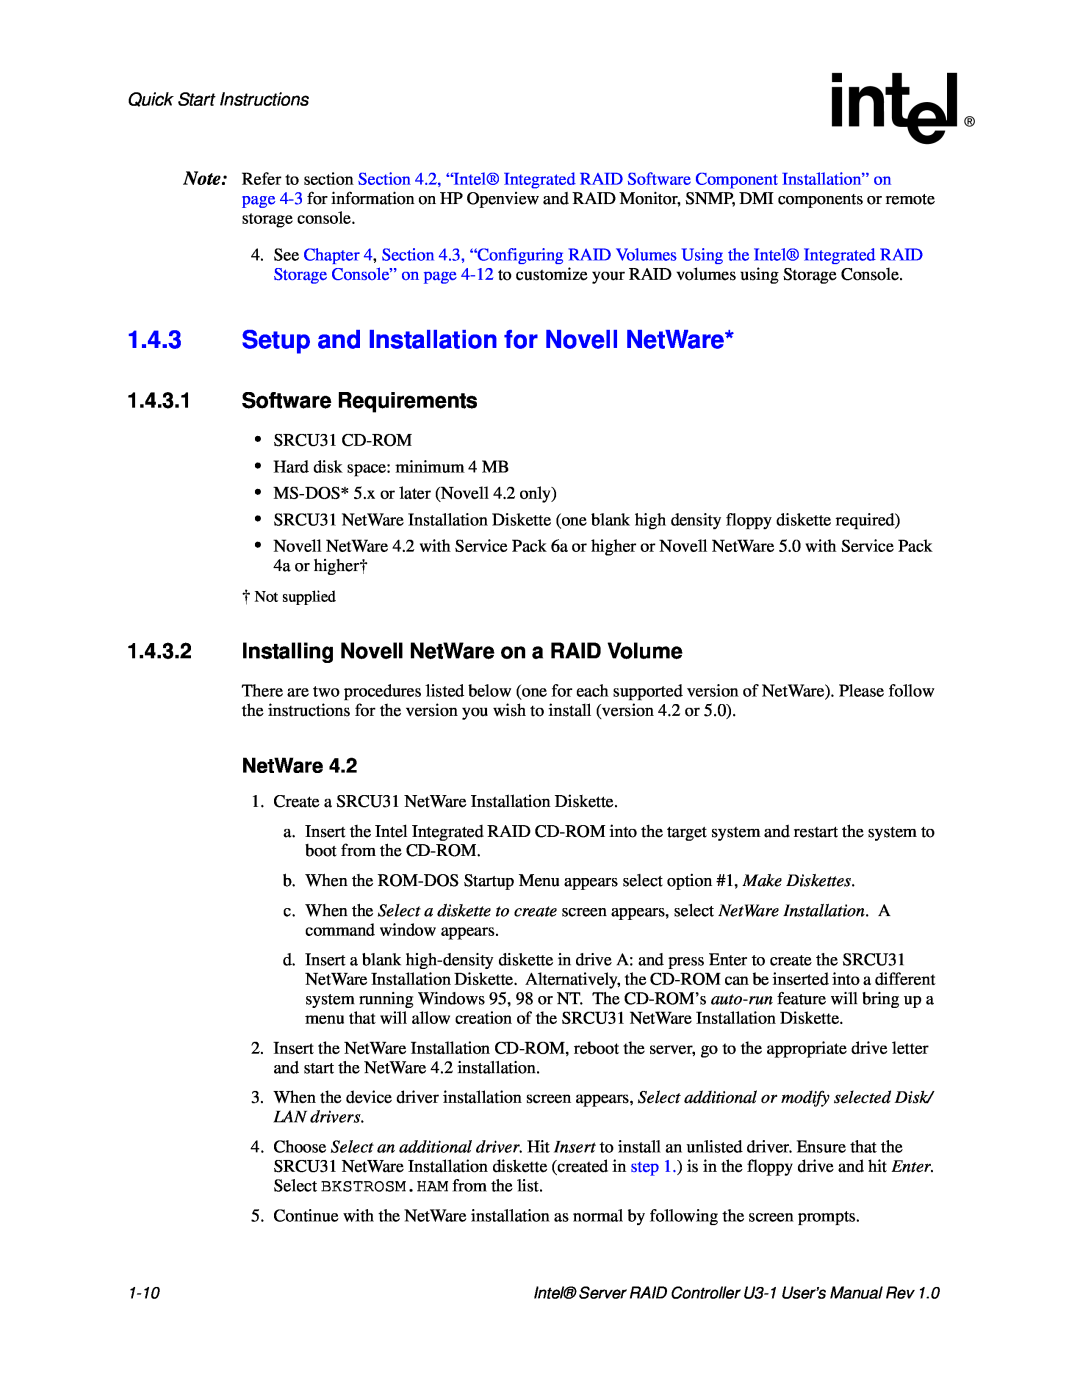 Intel SRCU31 1.4.3Setup and Installation for Novell NetWare, 1.4.3.1Software Requirements, Quick Start Instructions 